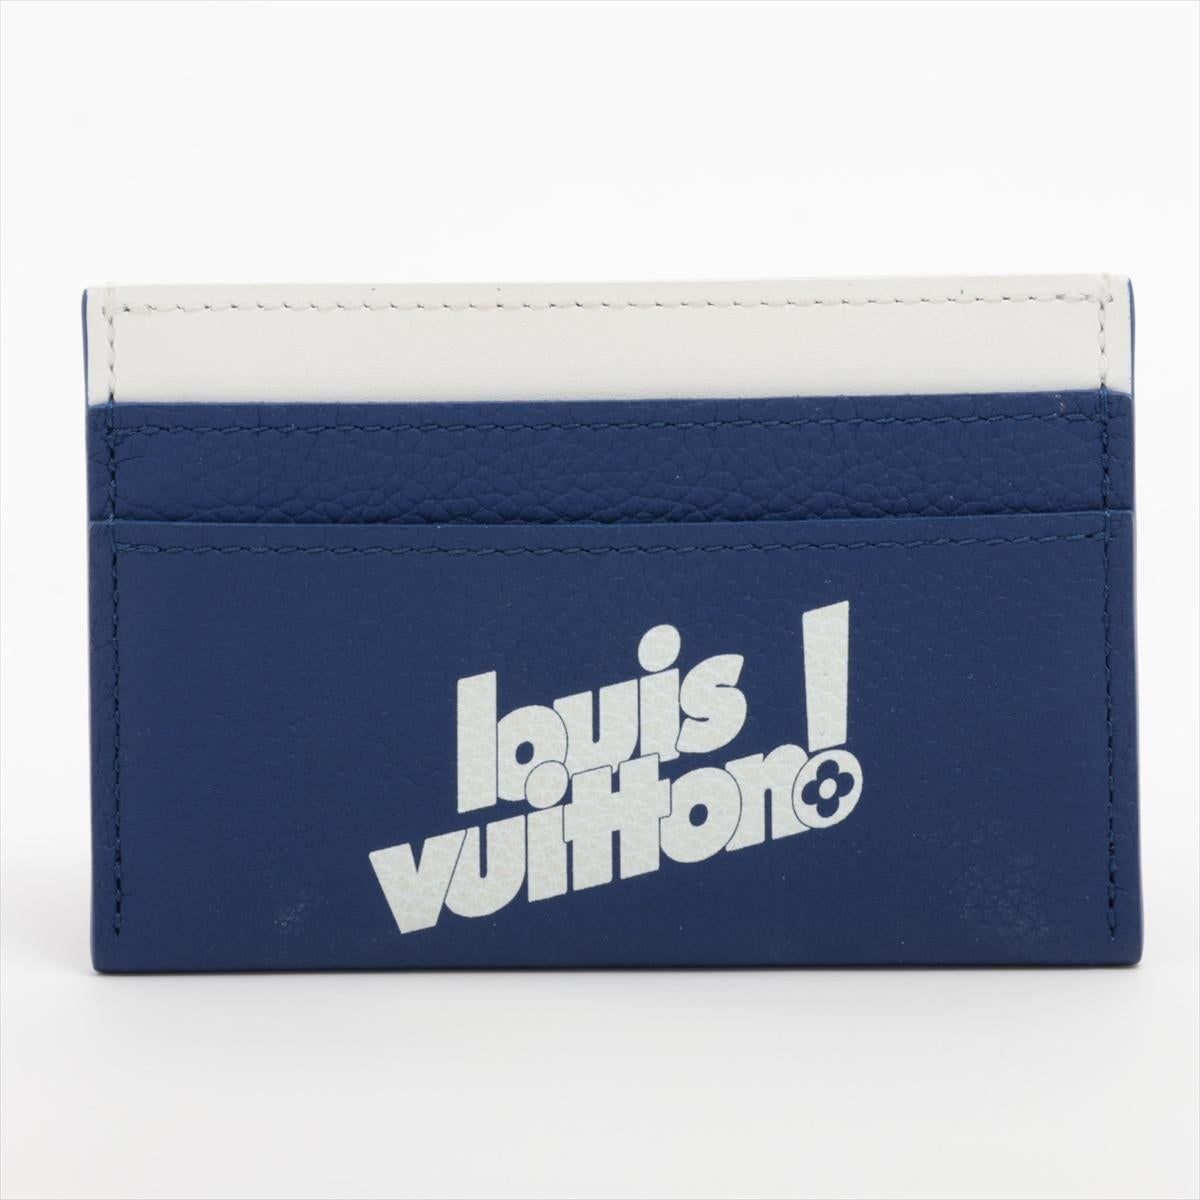 The Louis Vuitton Limited Edition Everyday Signature Printed Card Case in Blue with White Print is a stylish and practical accessory that combines luxury with functionality. Crafted from high-quality materials, the card case features a vibrant blue